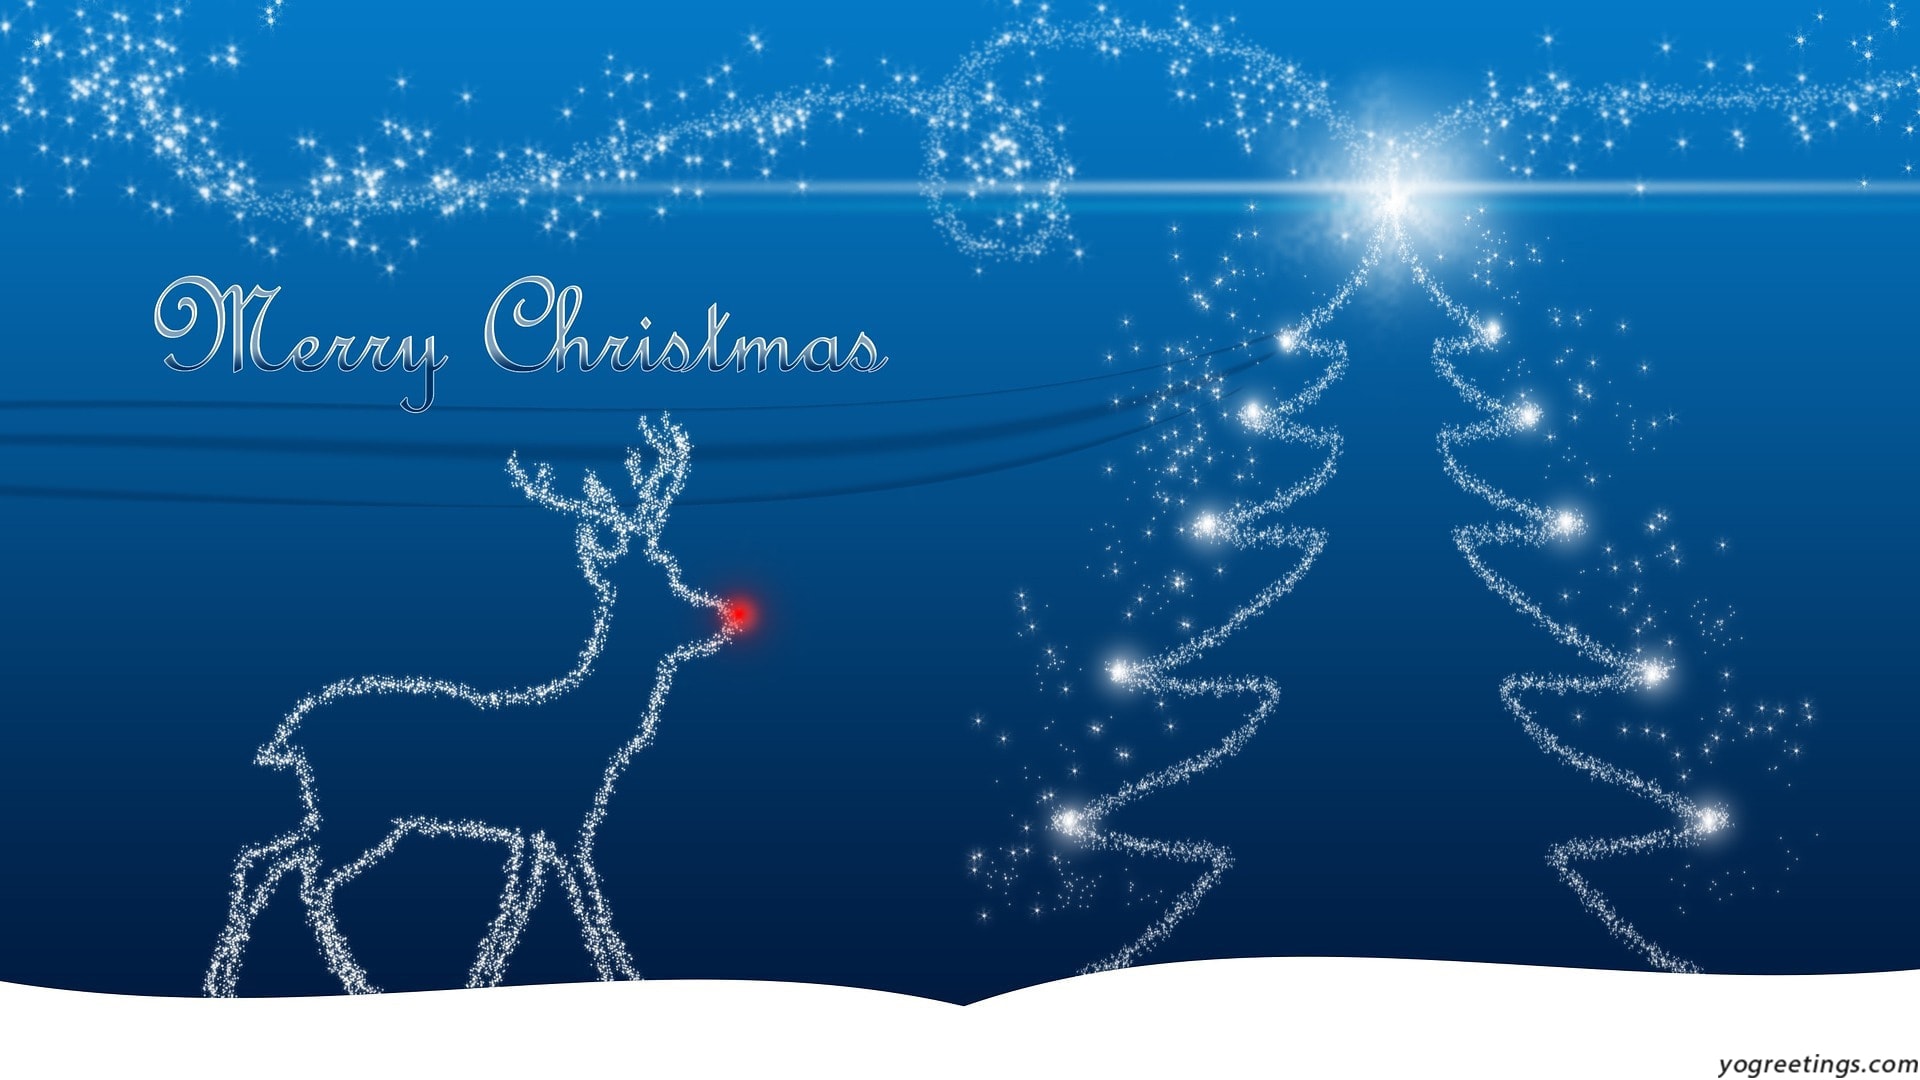 Merry Christmas Wallpaper Full HD Free Download - Images 9